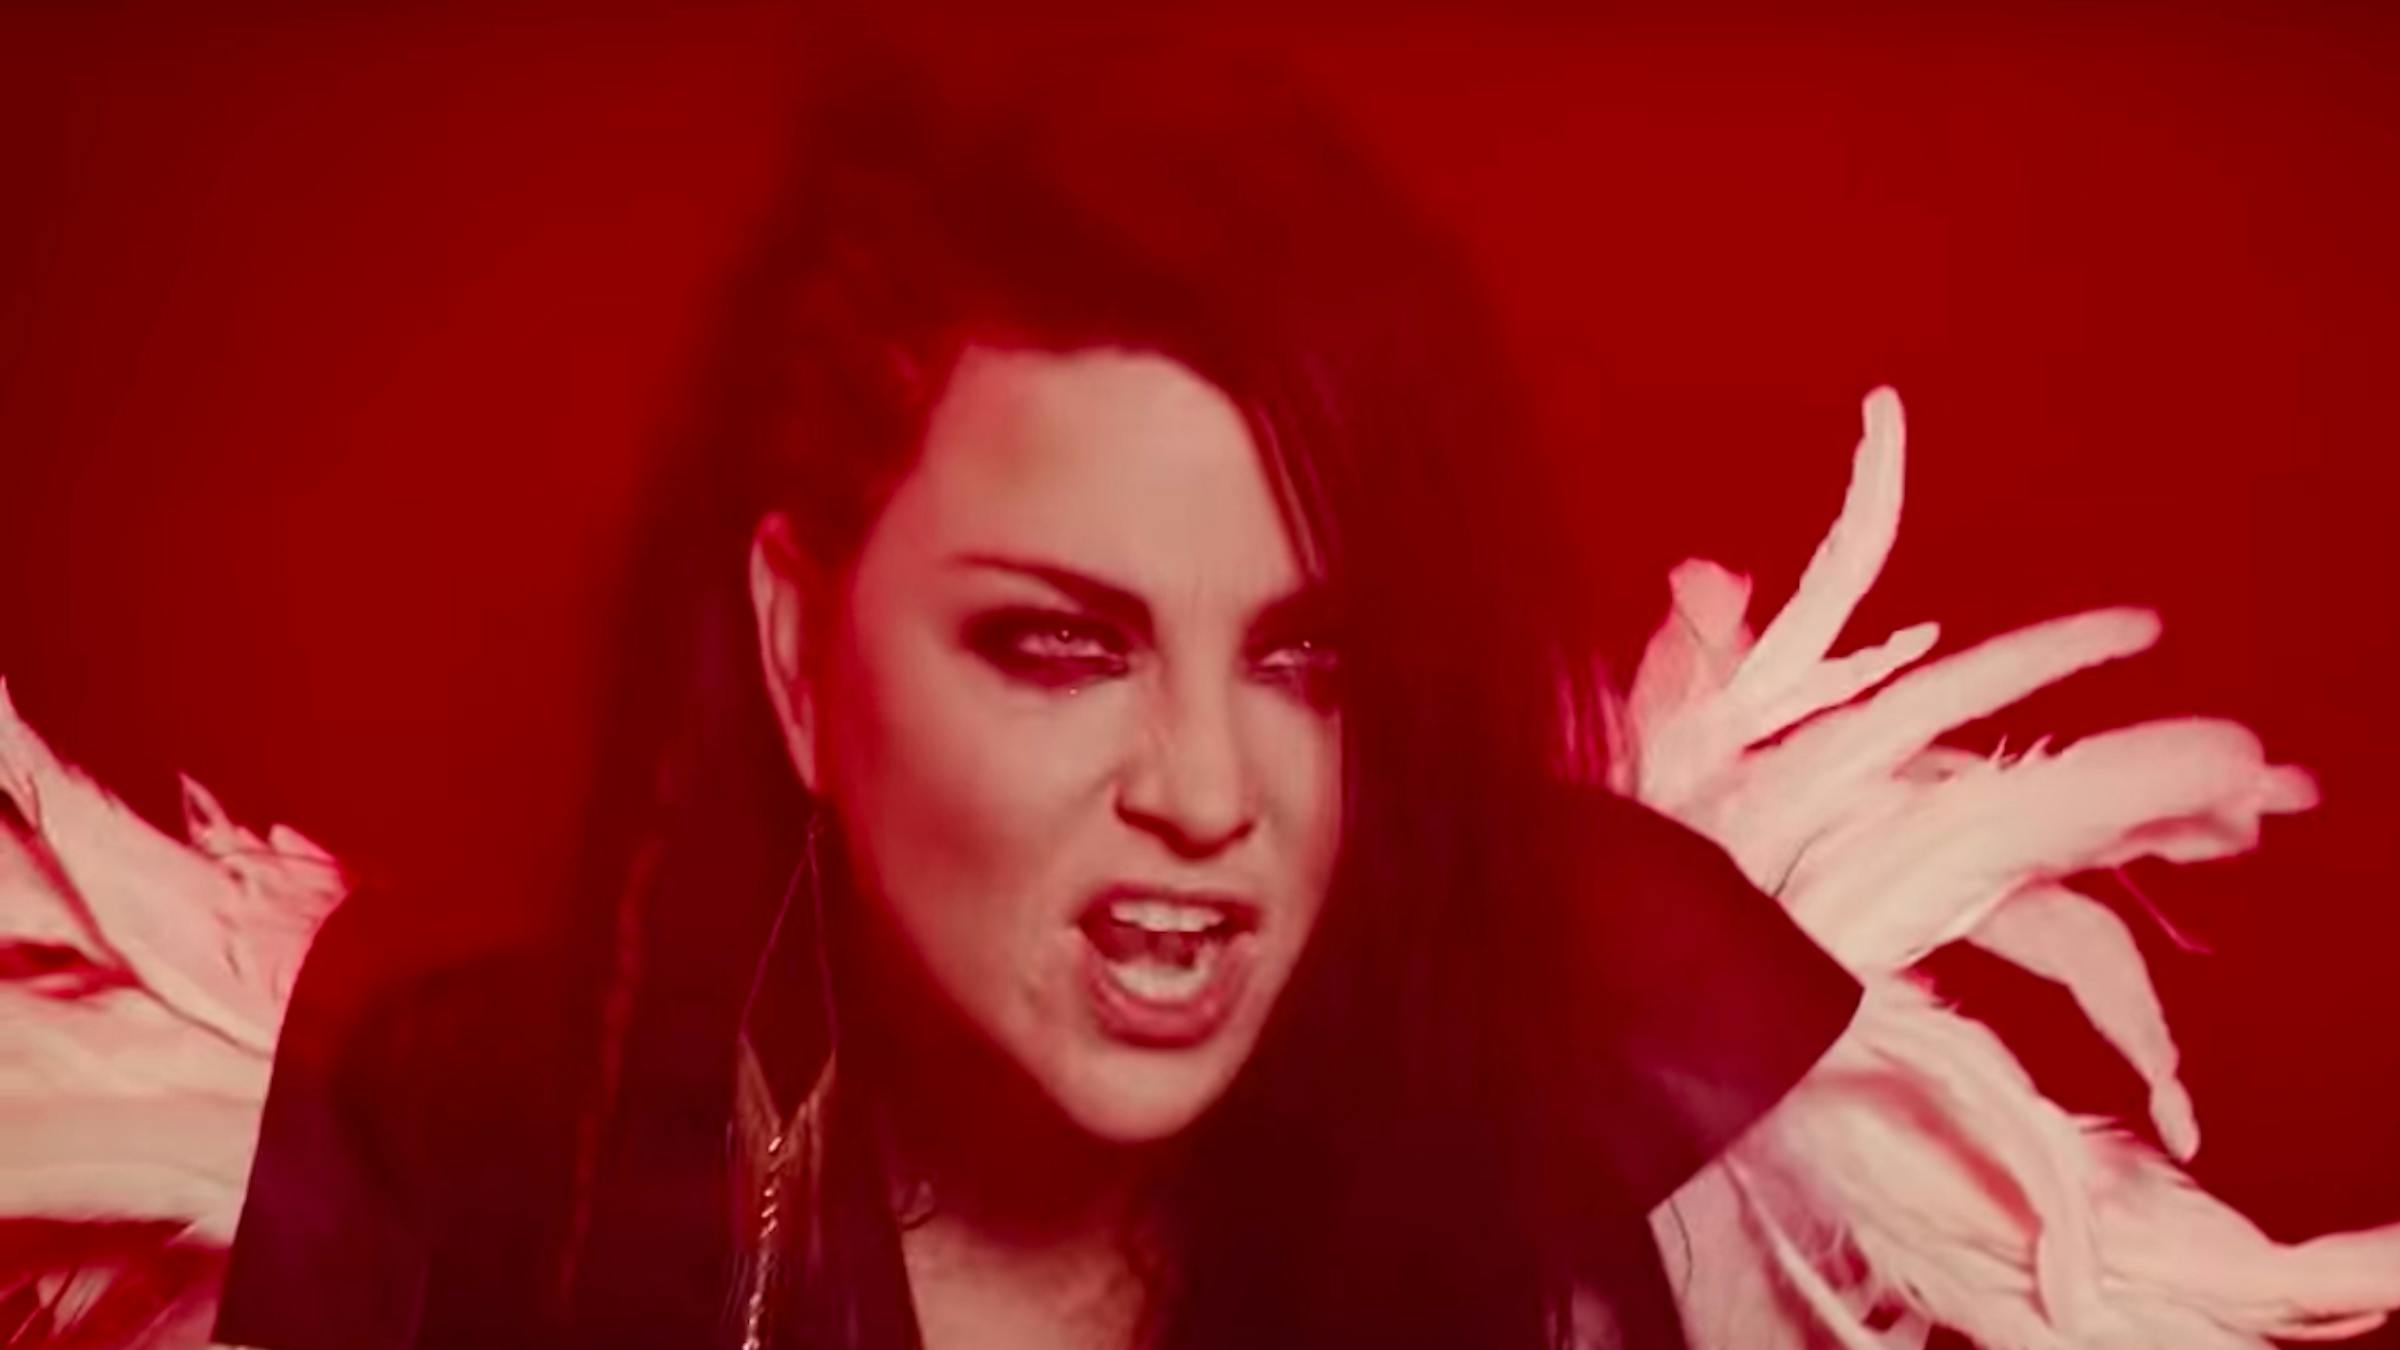 Watch Evanescence's Fiery Video For Their Cover Of Fleetwood Mac's The Chain